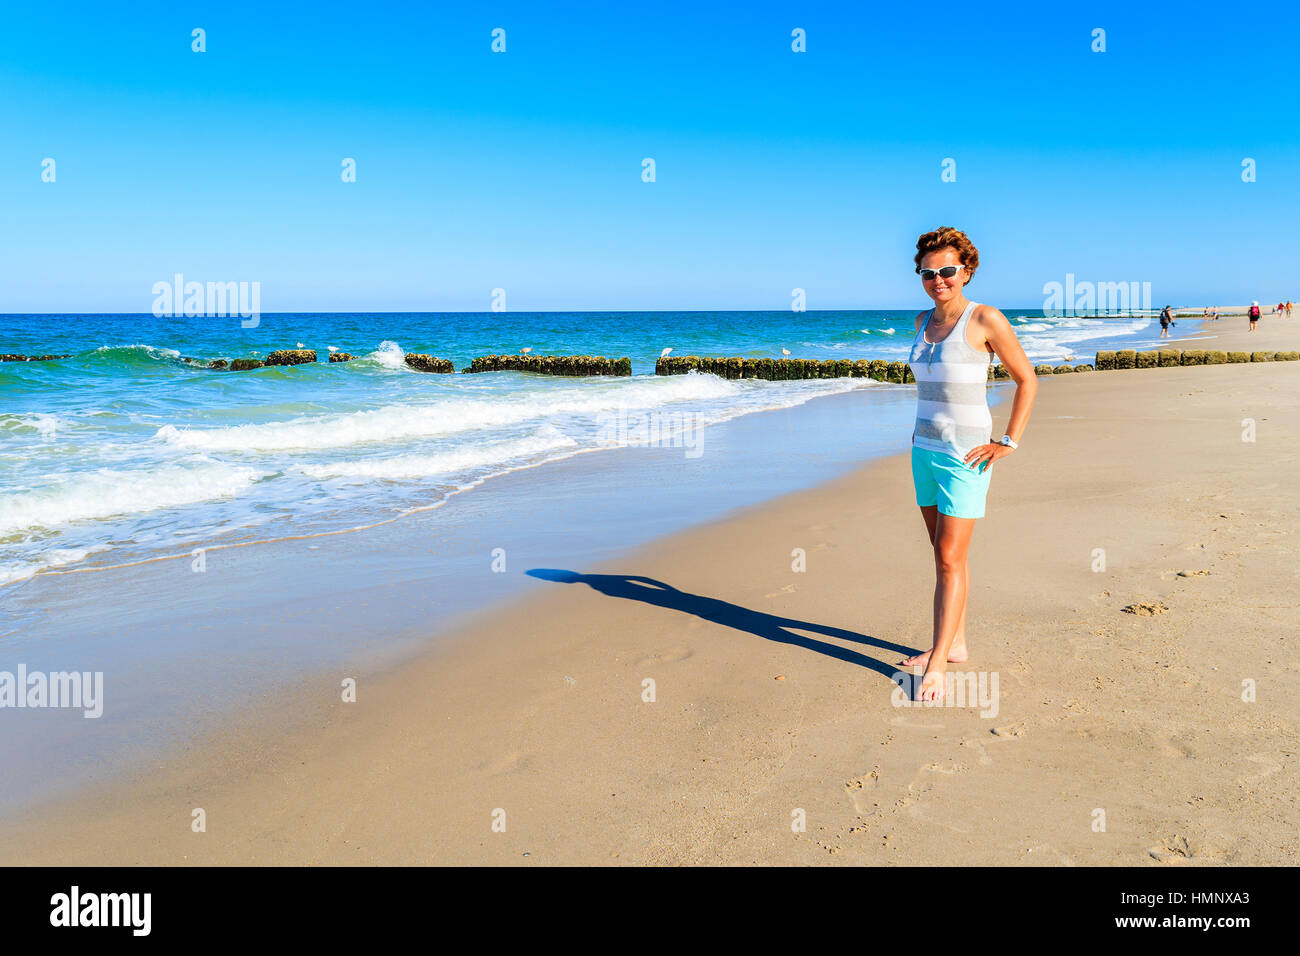 Young attractive woman standing on sandy beach, Sylt island, Germany Stock Photo